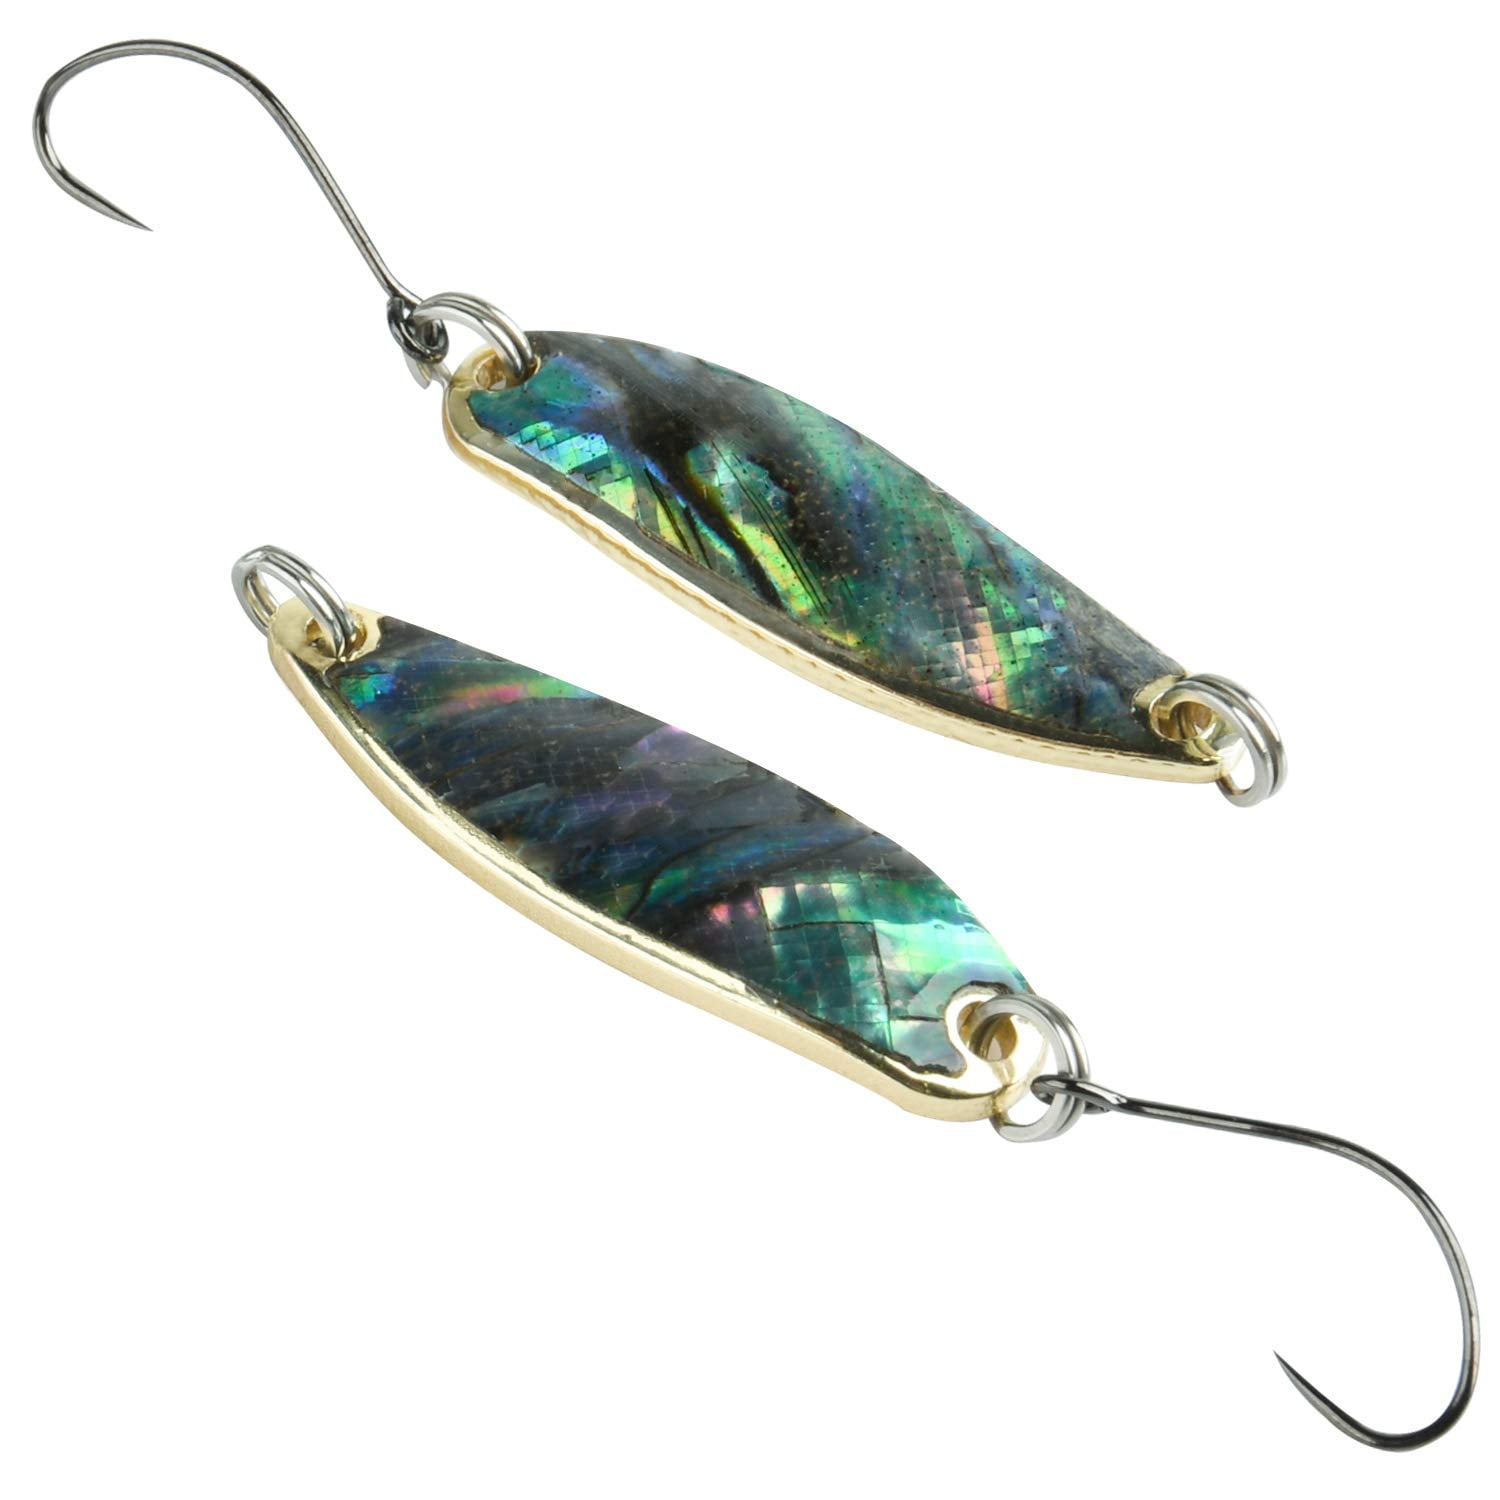 Goture Fishing Spoon Lure Reflective Fishing Jigs Fishing Lures for  Panfish, Sunfish, Bluegill, Walleye, Crappie, Pike Trout，Bass 